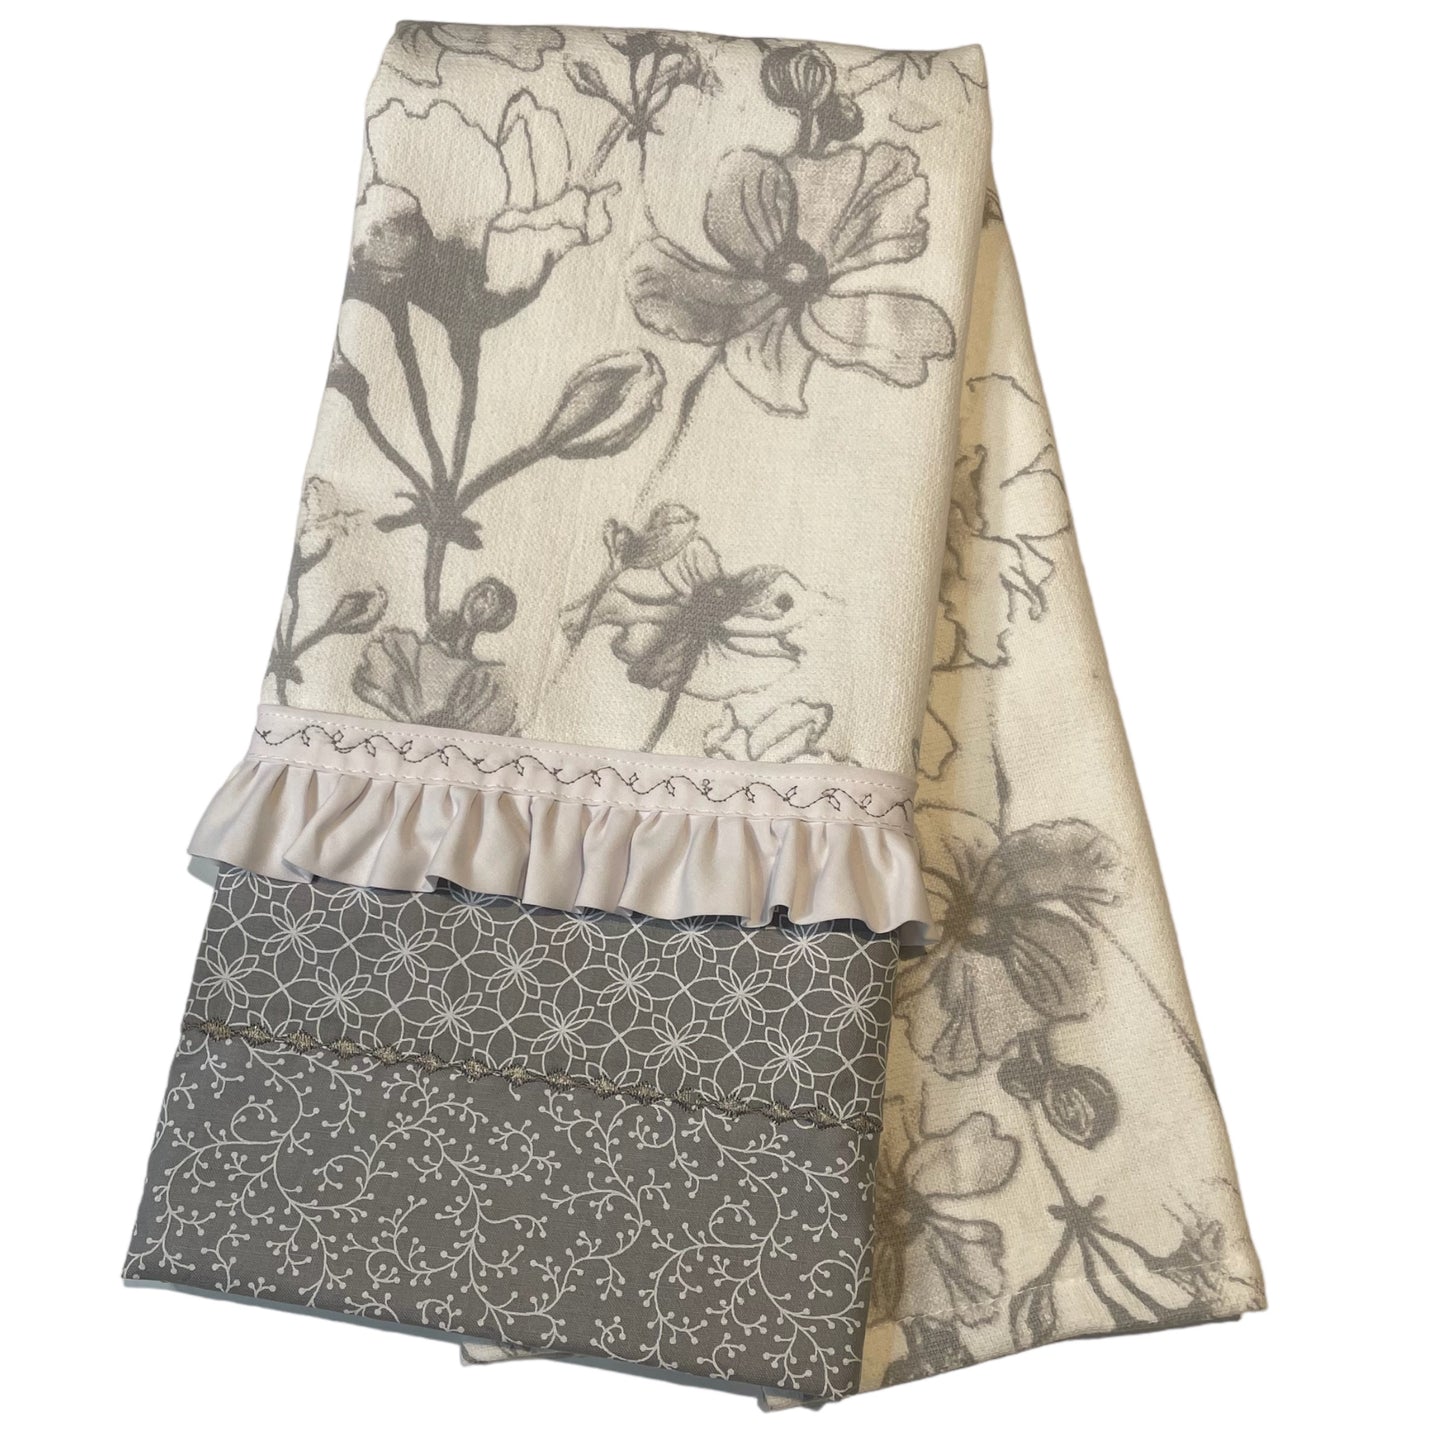 Modern Farmhouse Grey & White Floral Tea Towel - Handcrafted in Canada